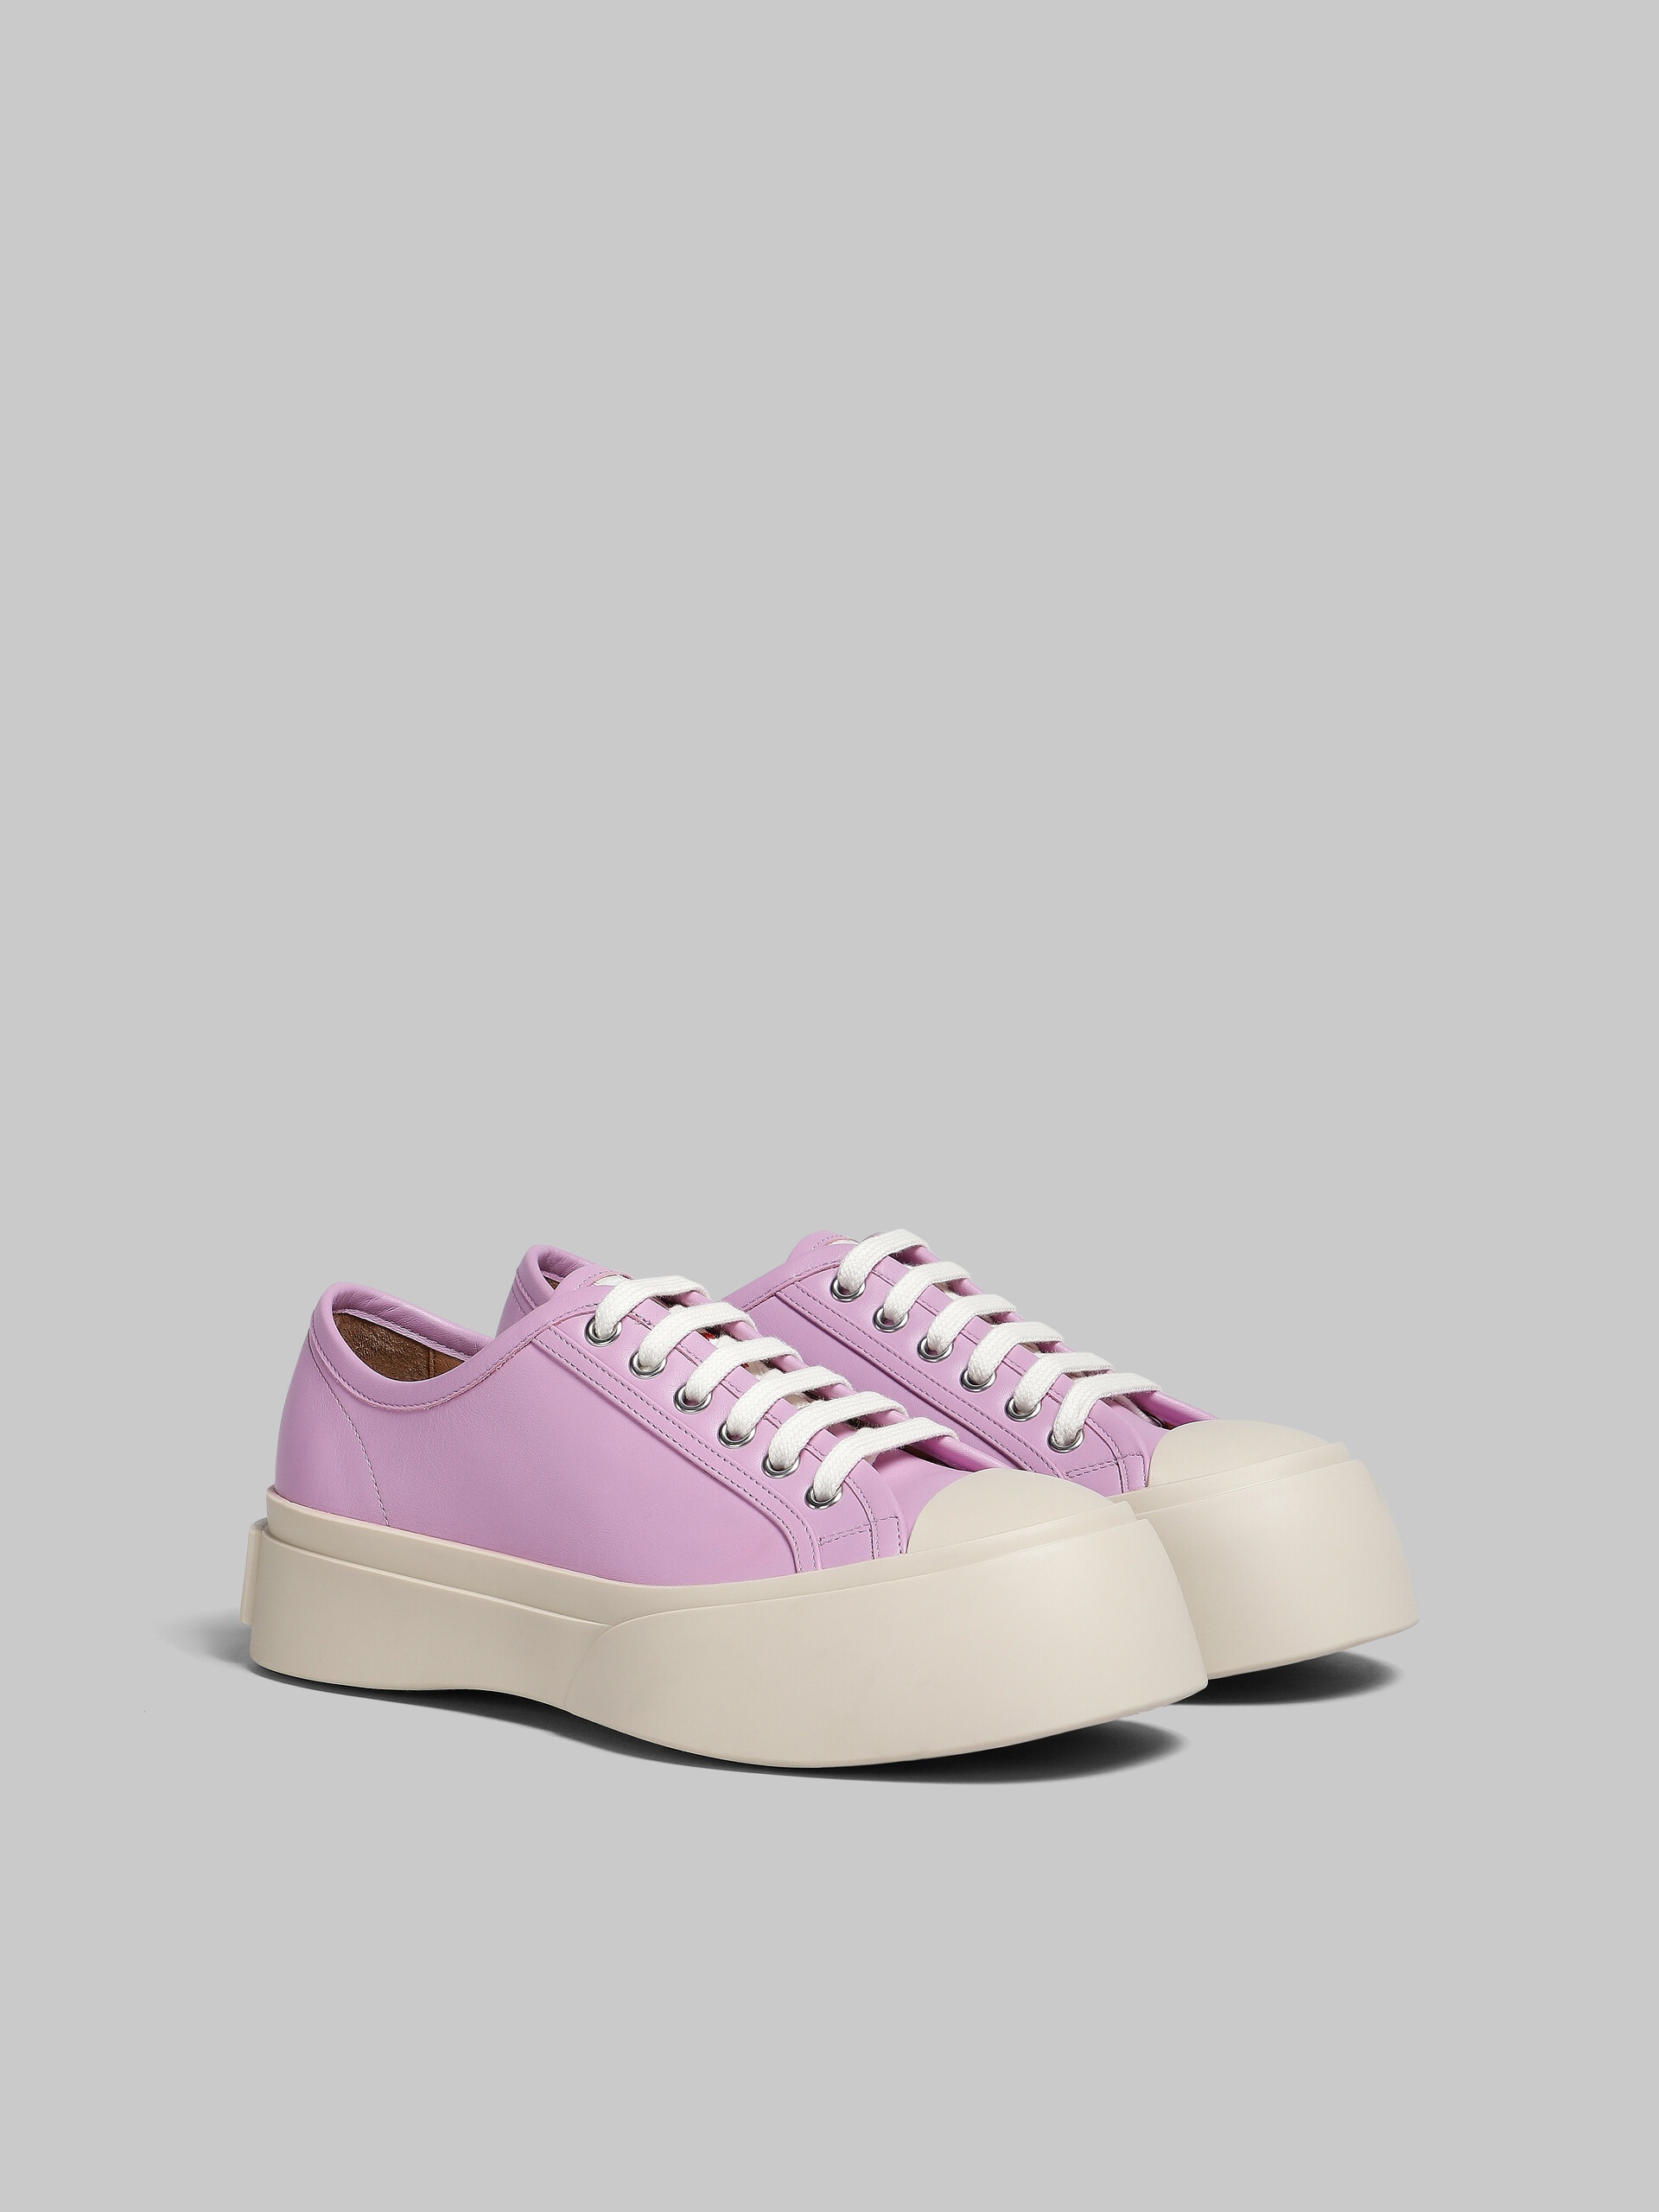 LILAC NAPPA LEATHER PABLO LACE-UP SNEAKER - 2